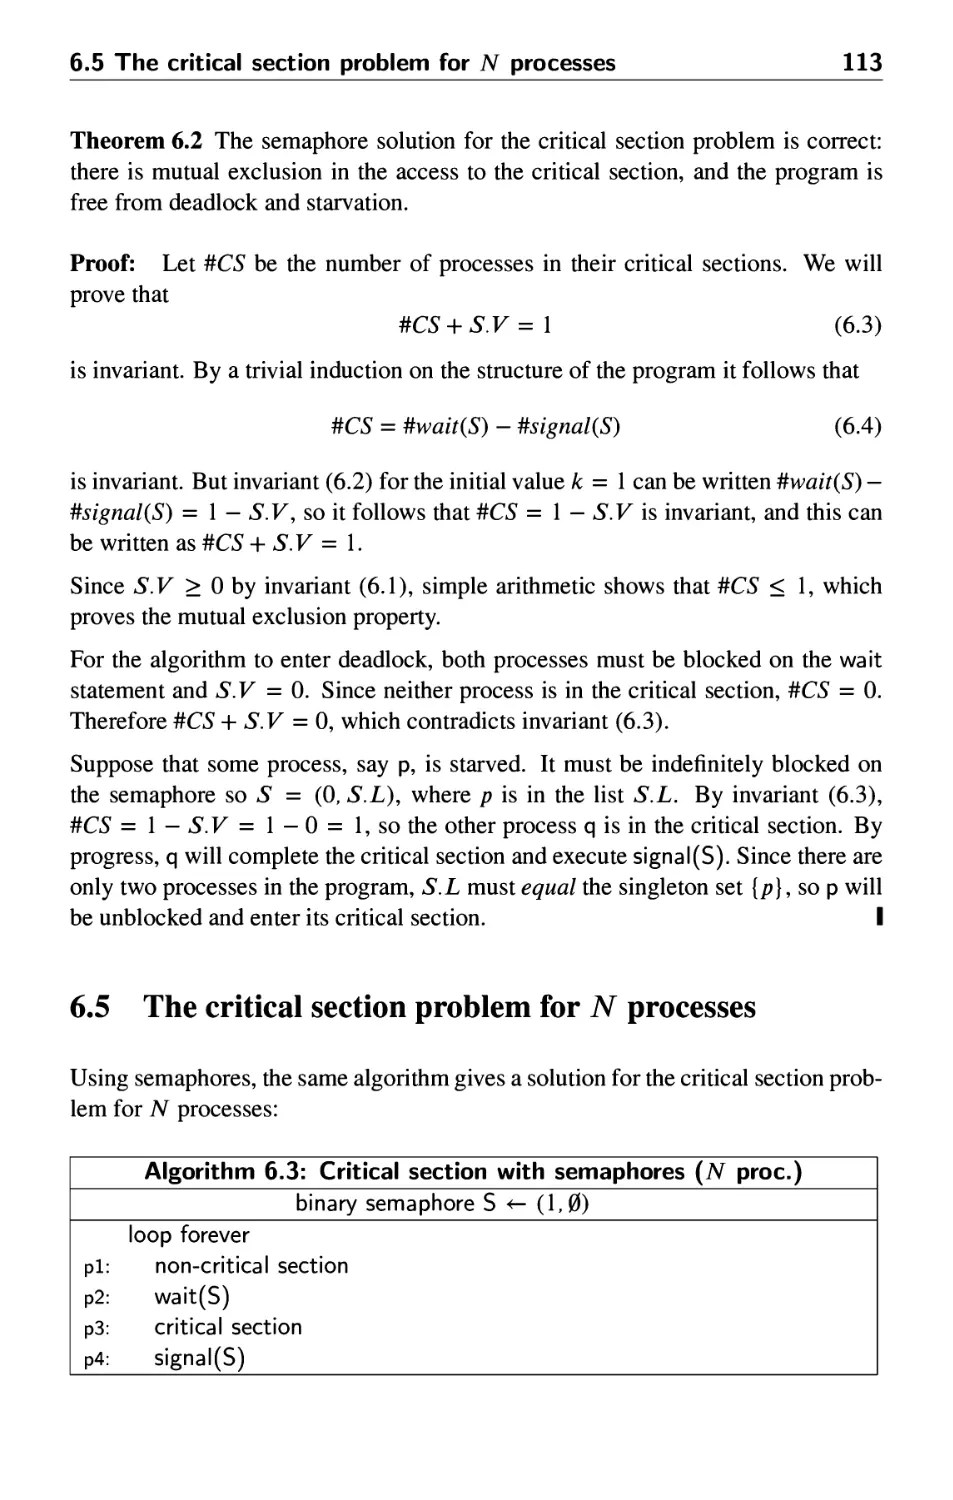 6.5 The critical section problem for N processes